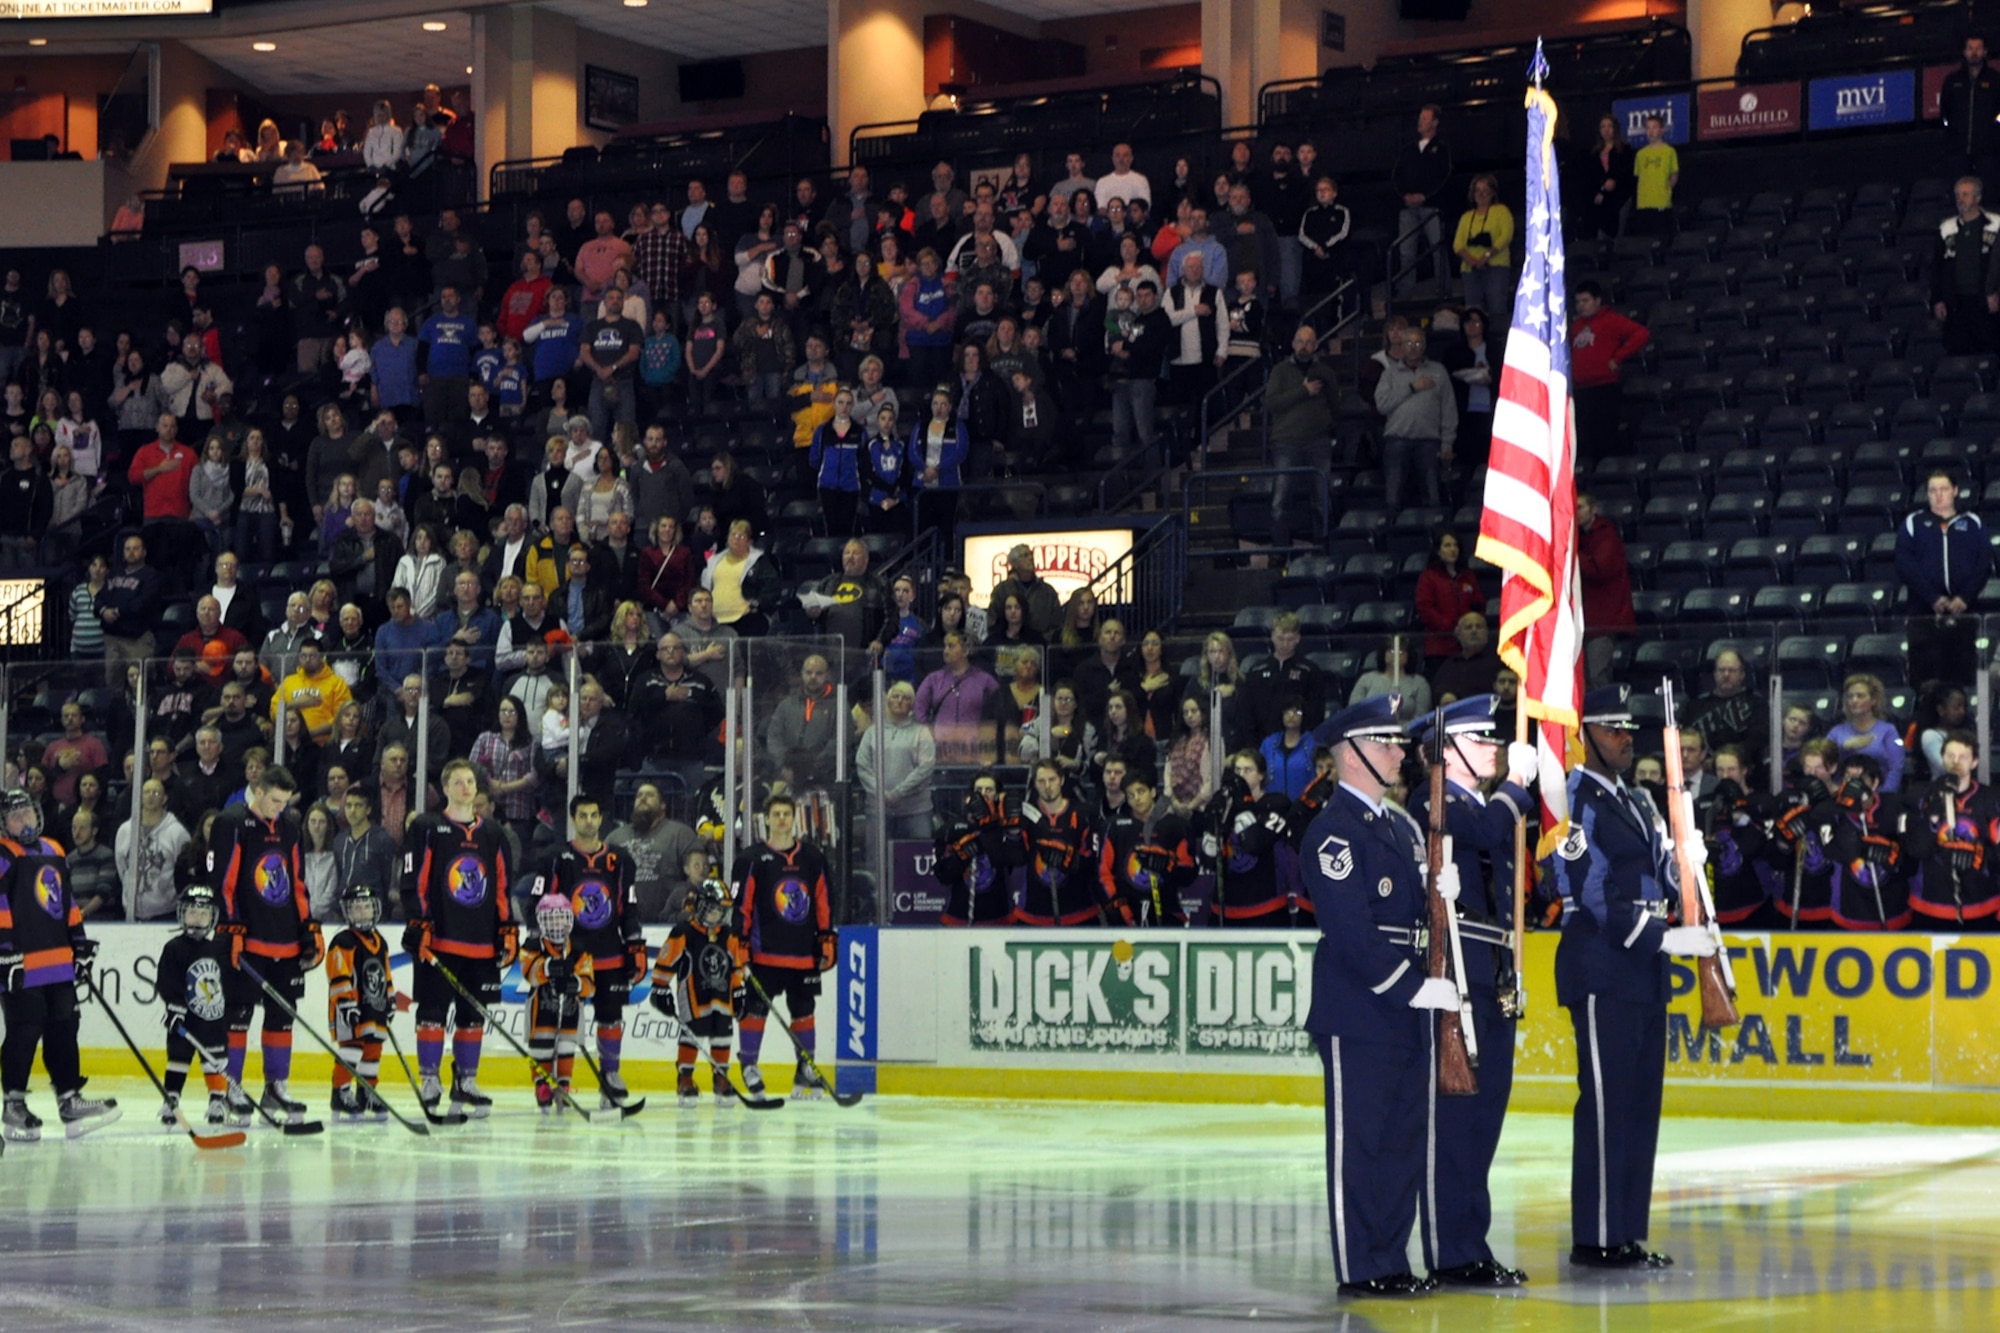 The 910th Airlift Wing Honor Guard presents the colors during pre-game festivities for a Youngstown Phantoms hockey game at the Covelli Centre here, April 2, 2016. A large group of Citizen Airmen, based at nearby Youngstown Air Reserve Station, Ohio, participated in YARS Night Out activities before and during the game. The Phantoms, a member of the United States Hockey League, defeated the Omaha Lancers 4-1 in front of a home ice crowd of more than 3000 fans. (U.S. Air Force photo/Master Sgt. Bob Barko Jr.)